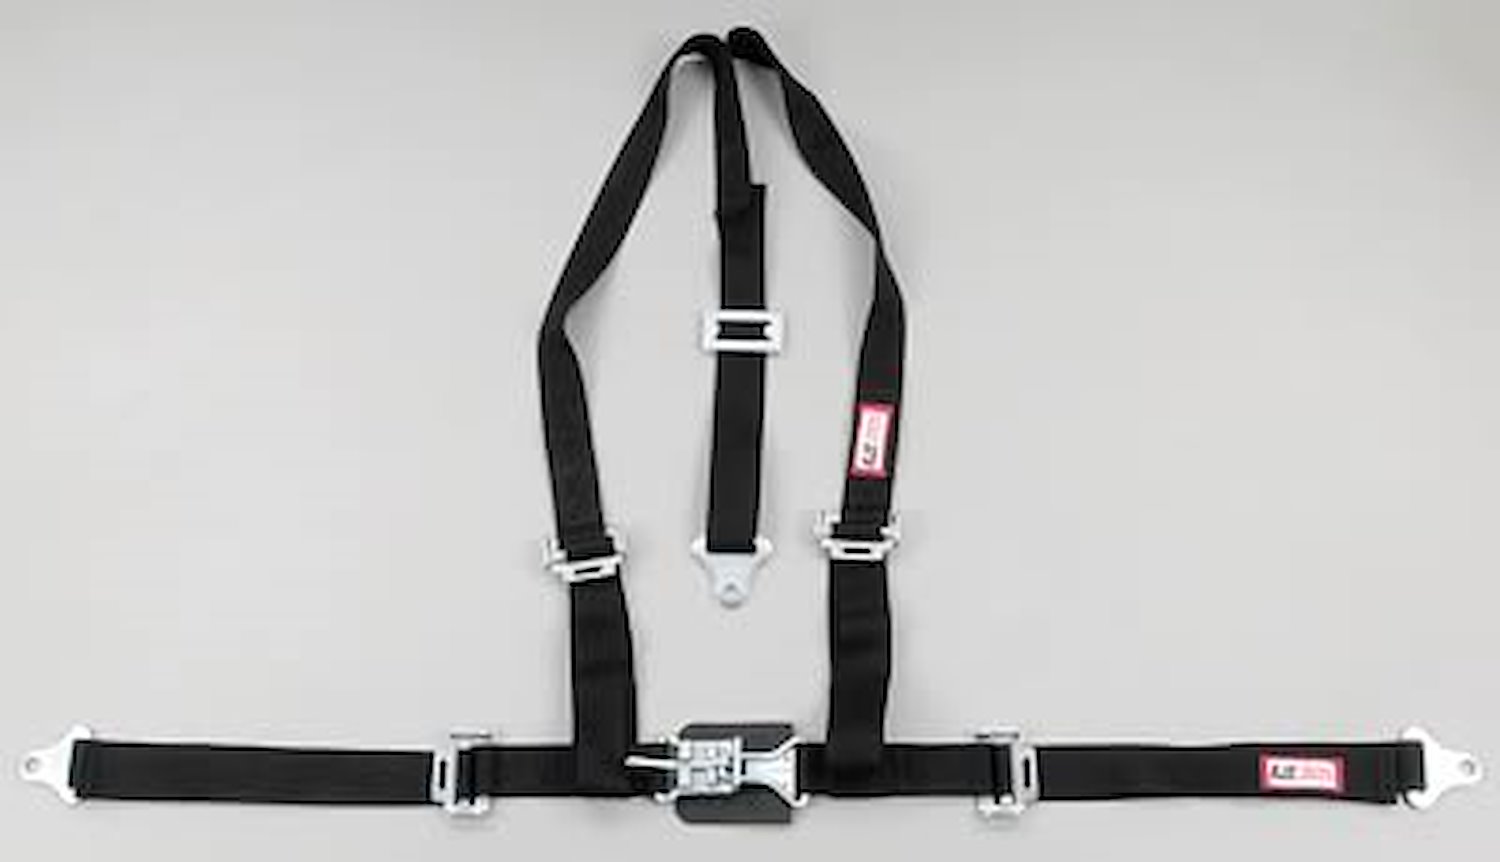 NON-SFI L&L HARNESS 2 PULL DOWN Lap Belt w/Adjuster 2 S.H. Y FLOOR Mount ALL WRAP ENDS PURPLE